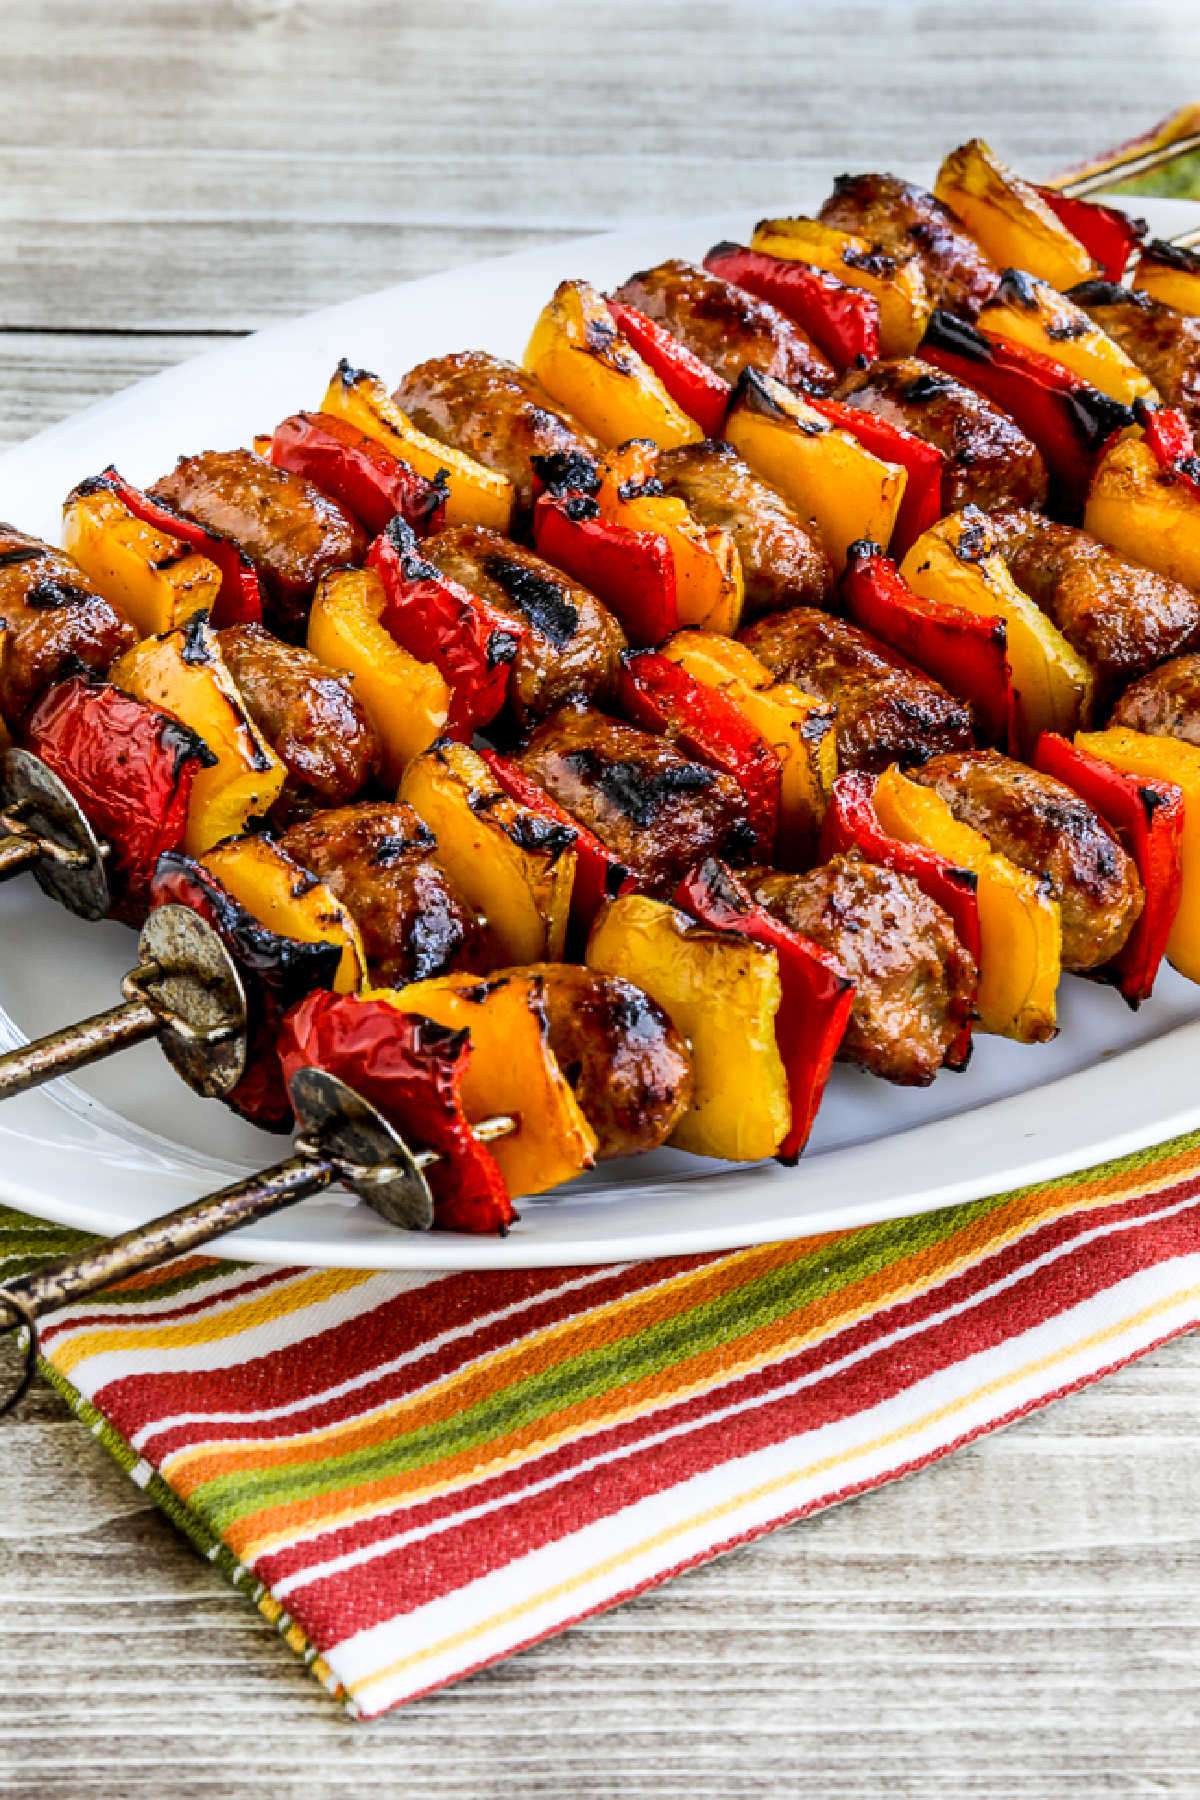 Grilled Sausage and Peppers kabobs shown on serving plate